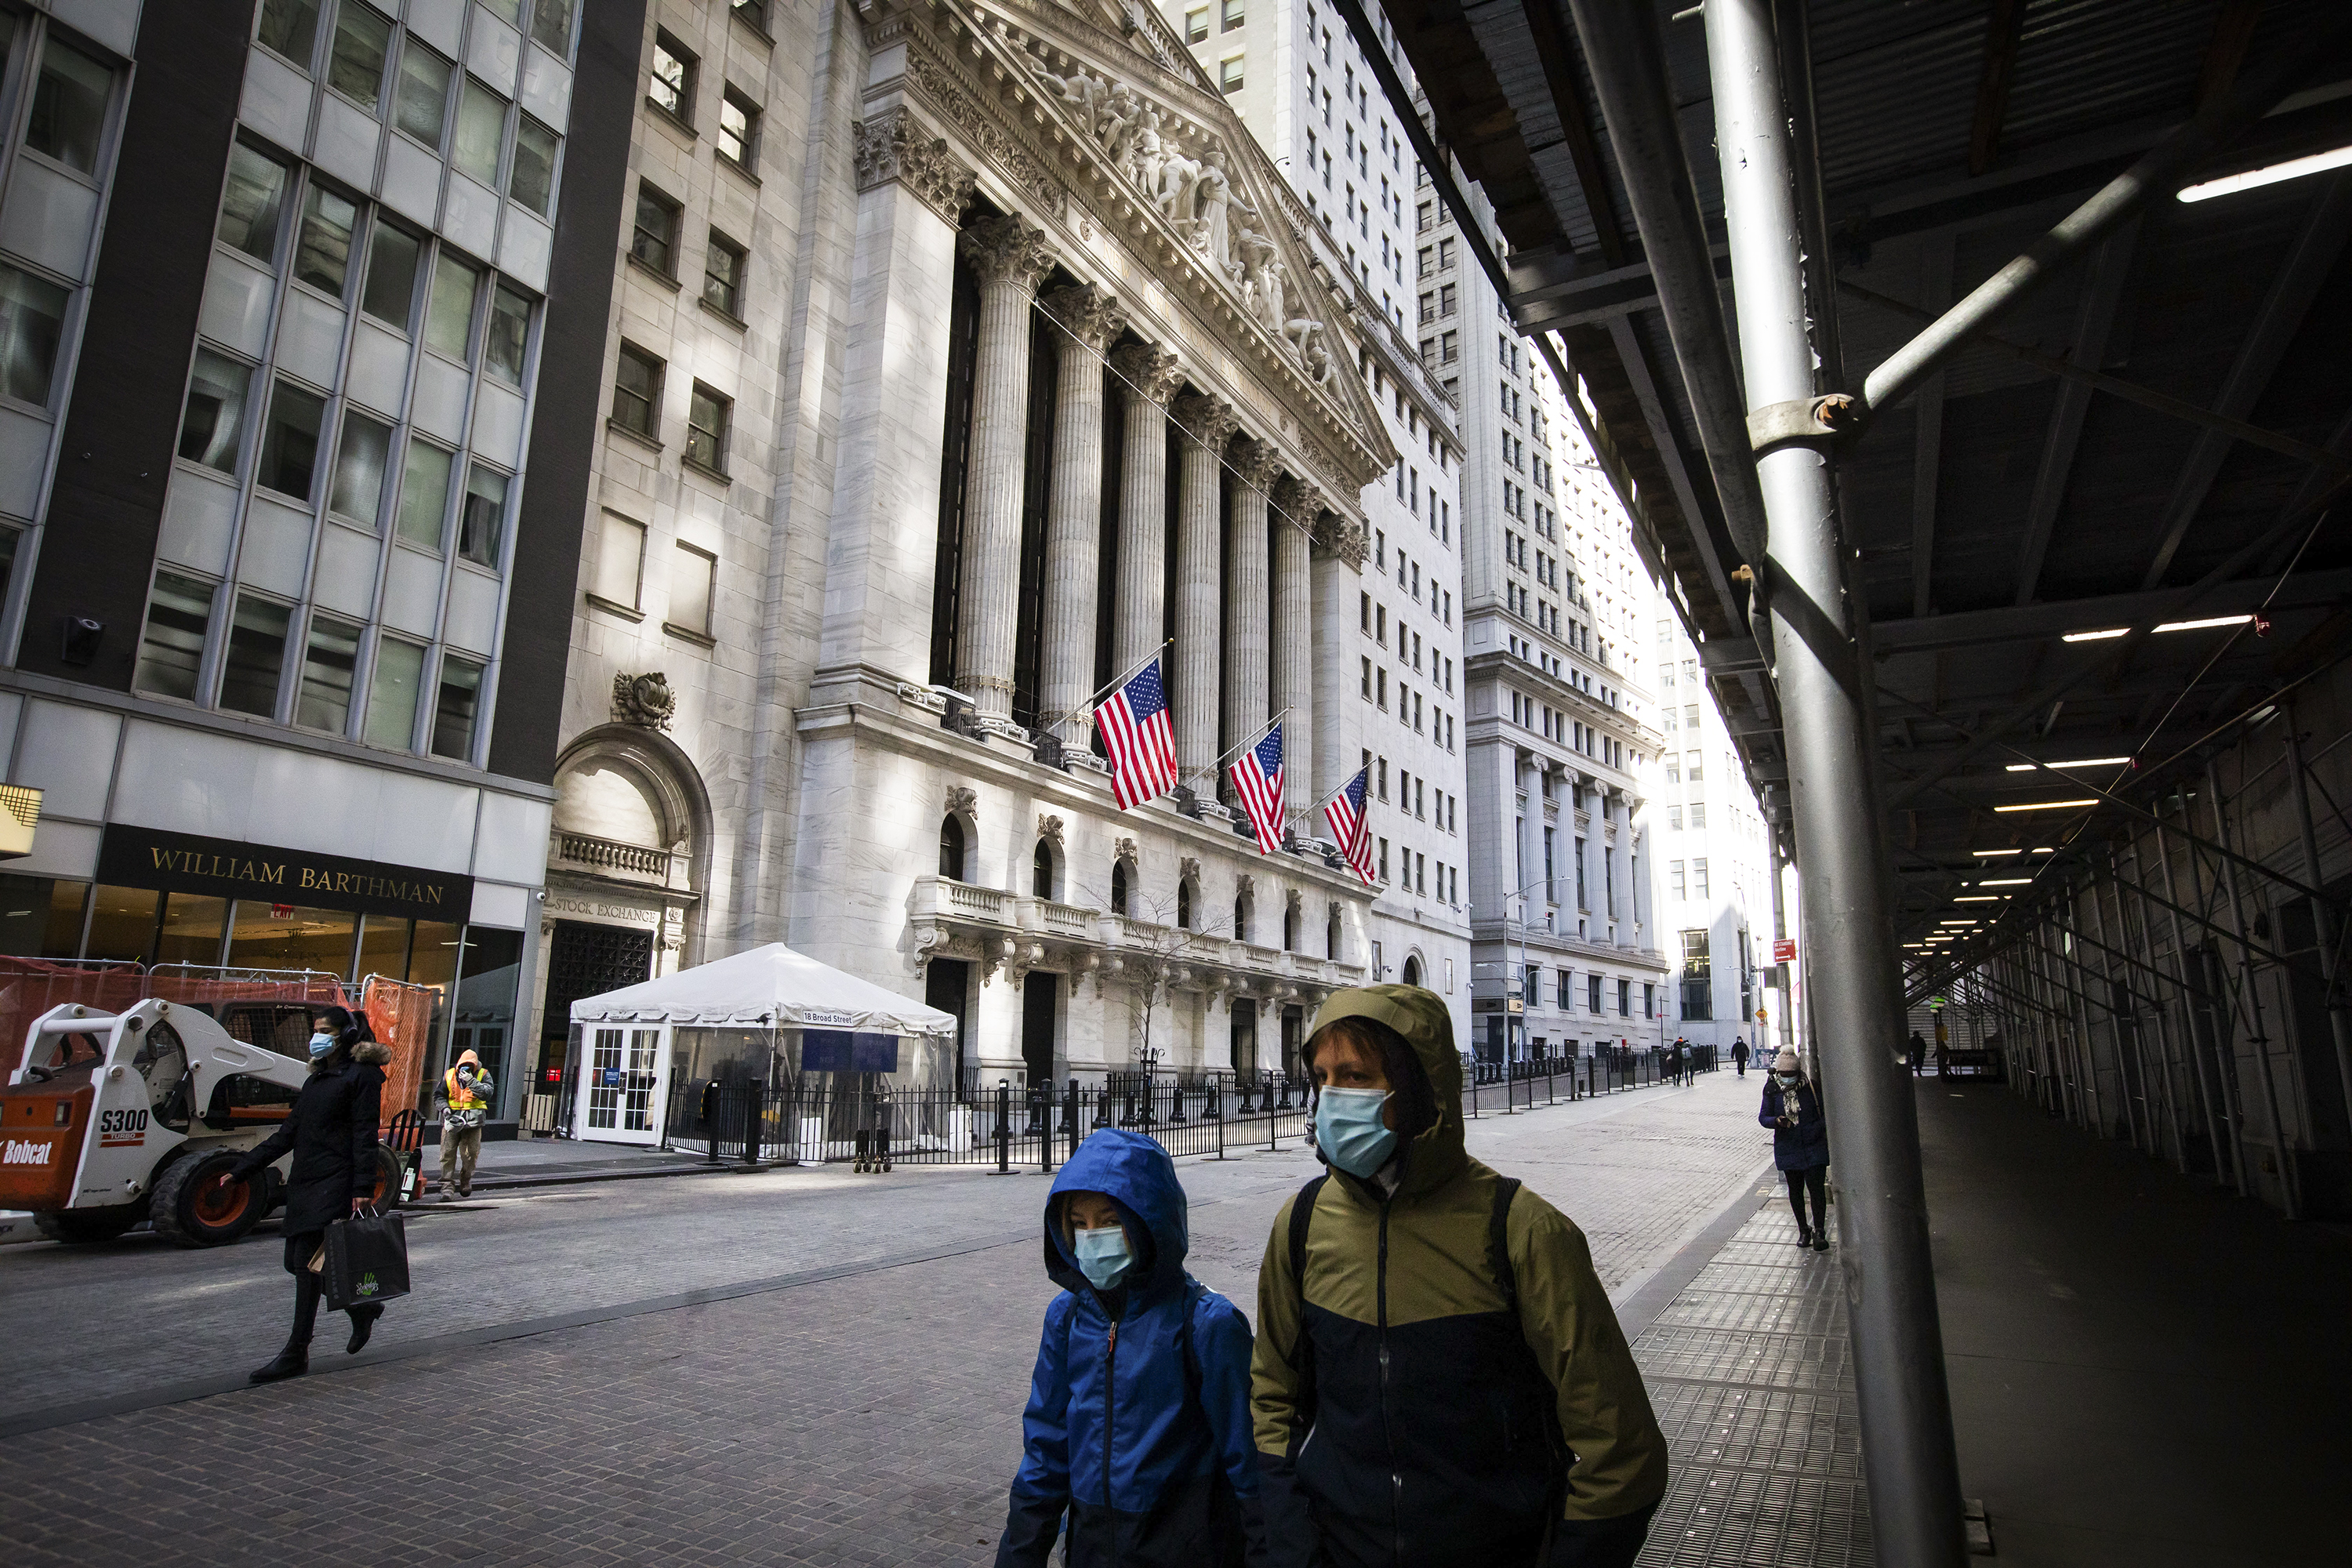 A few people walk past the New York Stock Exchange building on Wall Street.